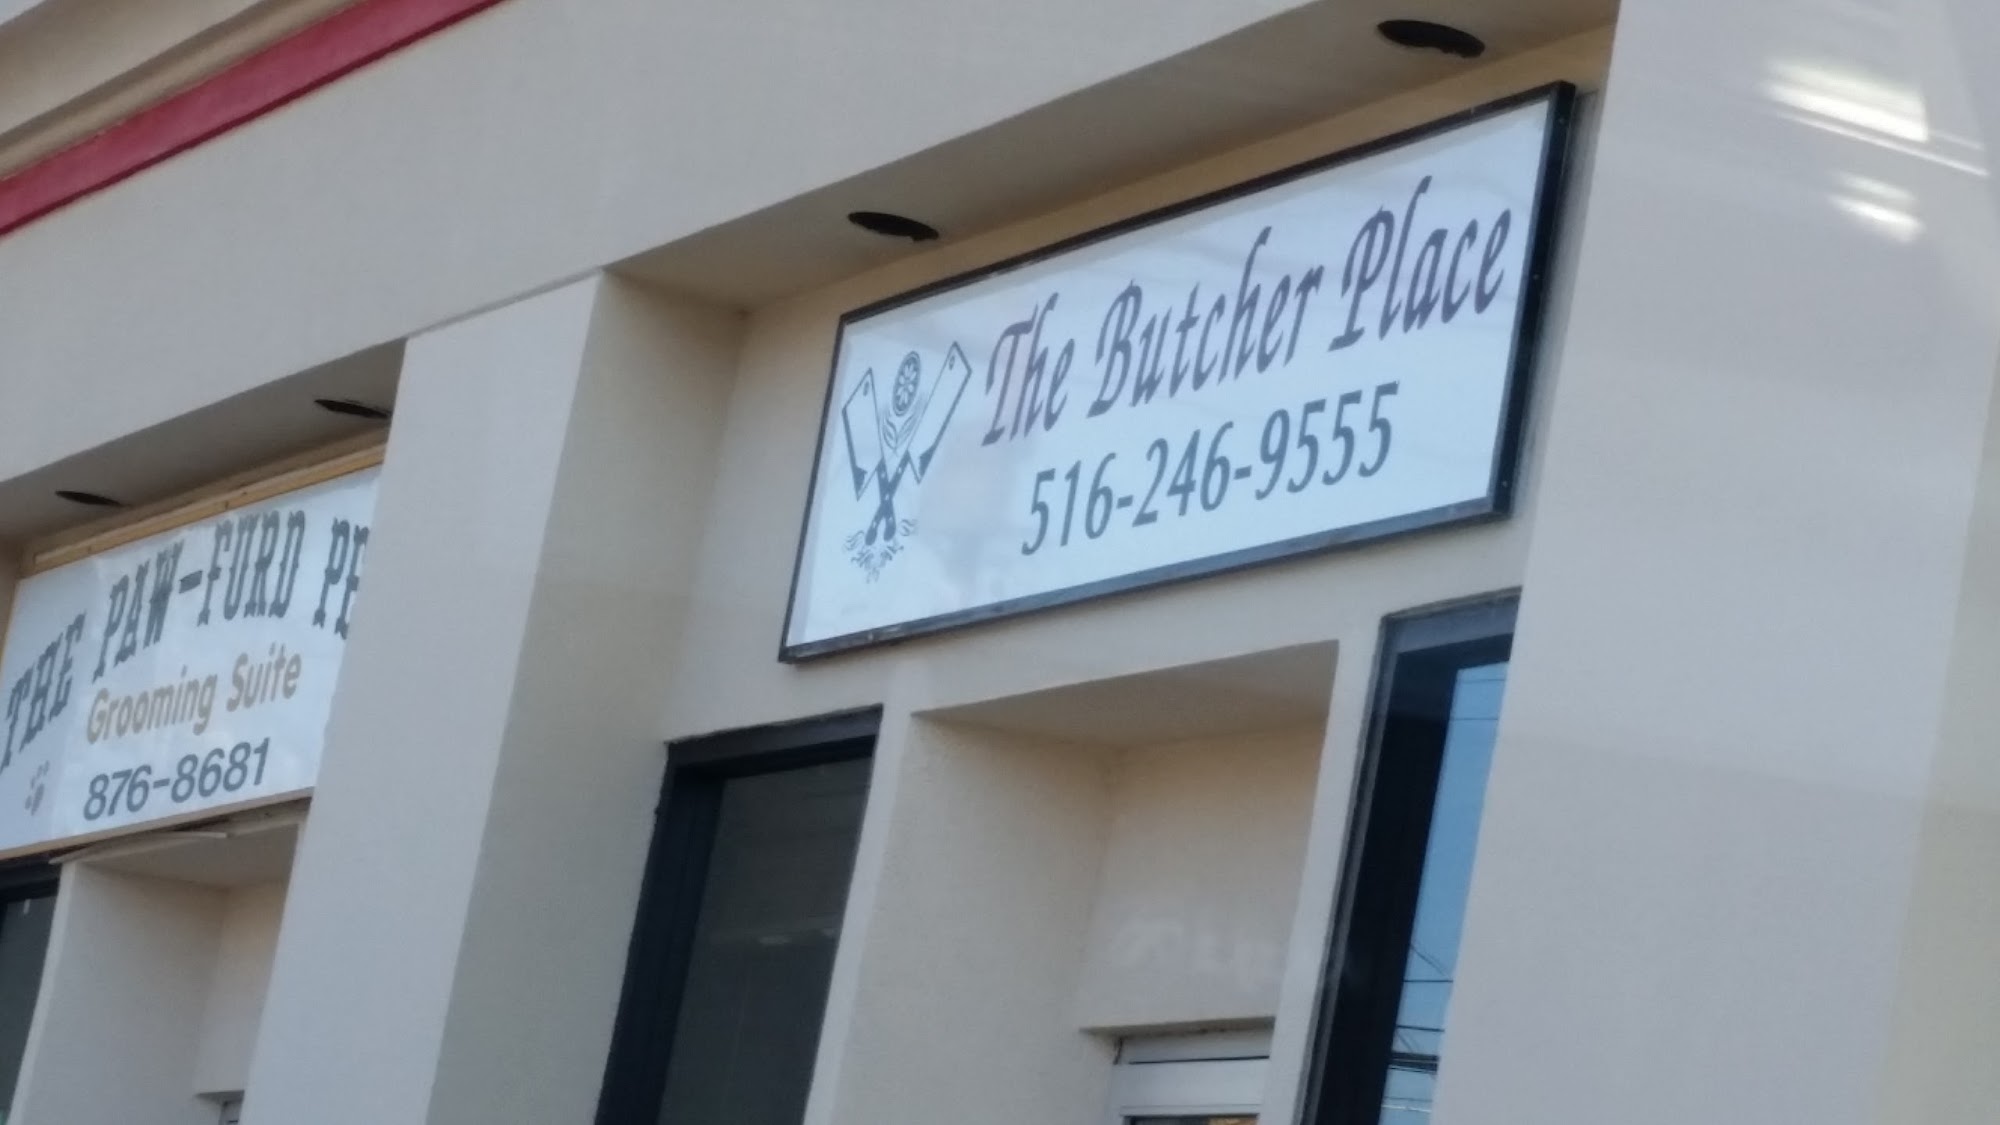 The Butcher Place